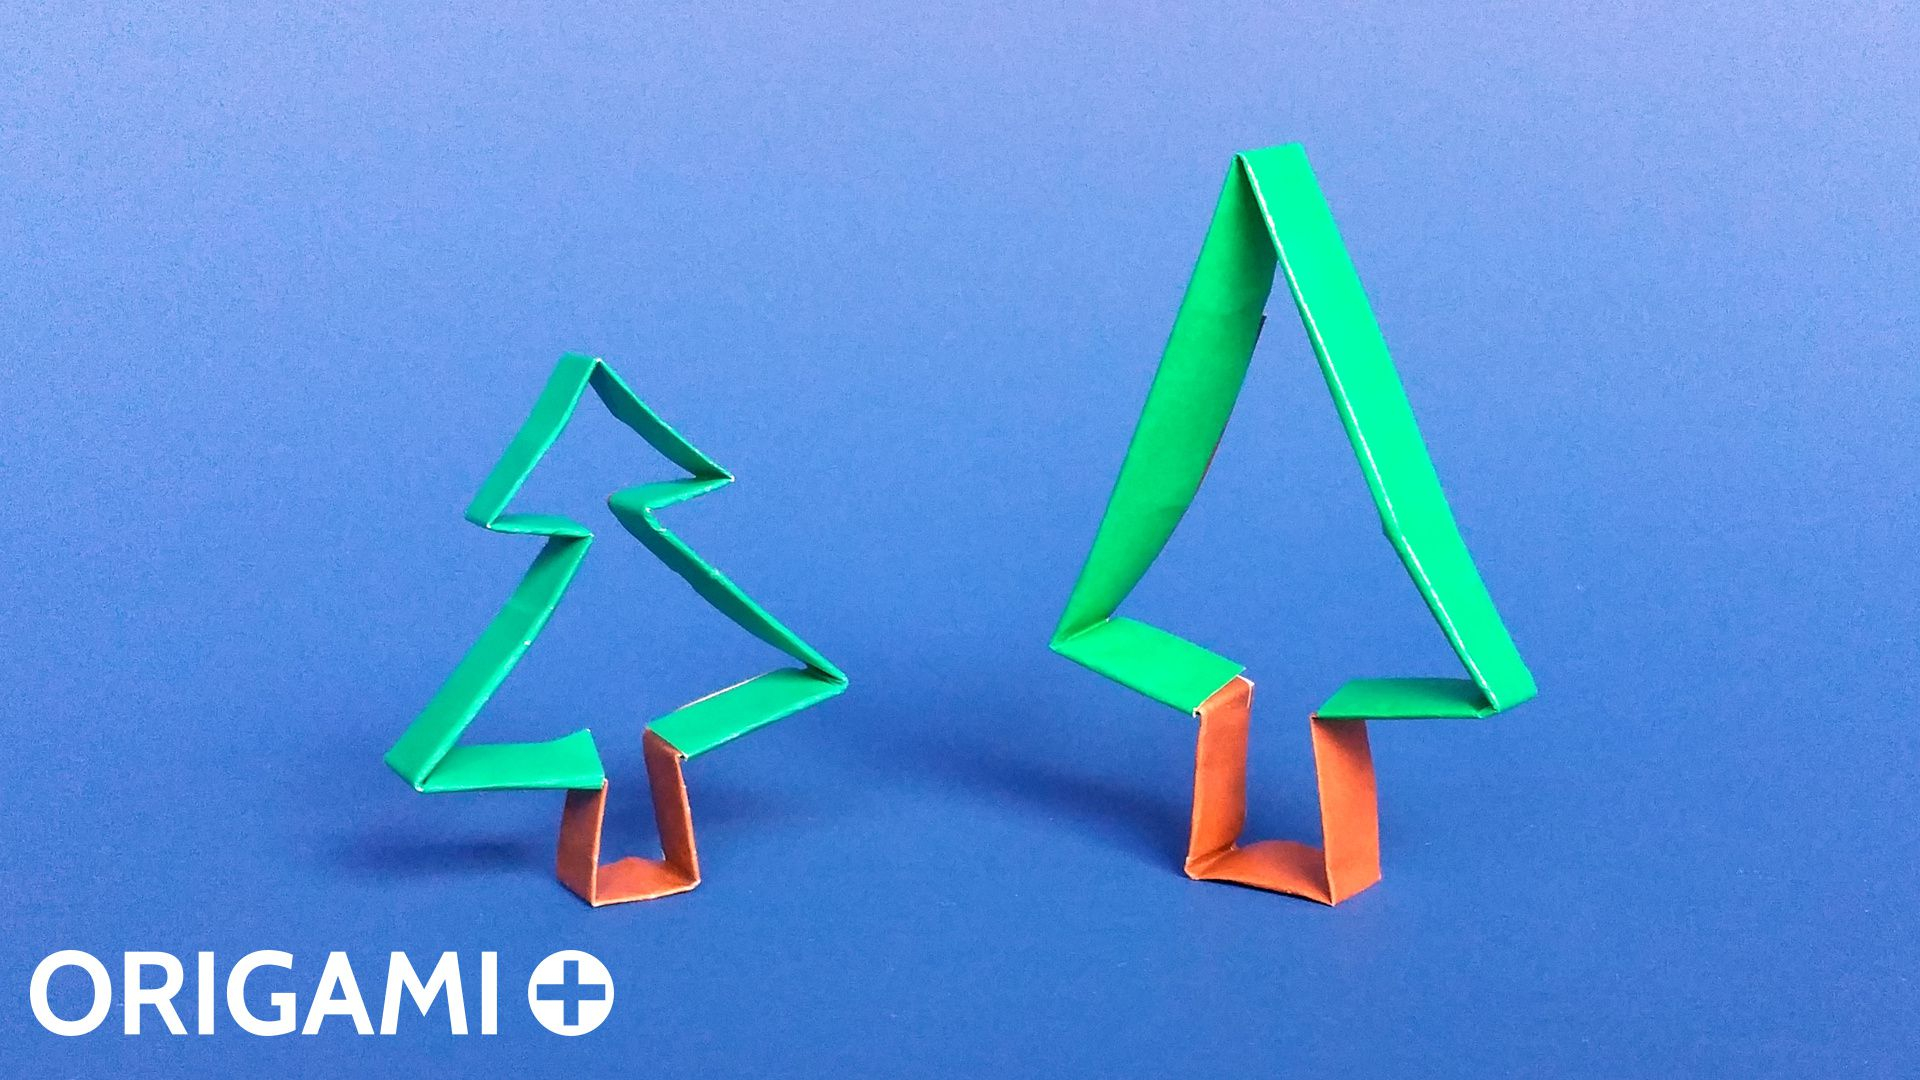 Easy Origami Christmas Ornaments Instructions Origami Christmas Tree Ornament